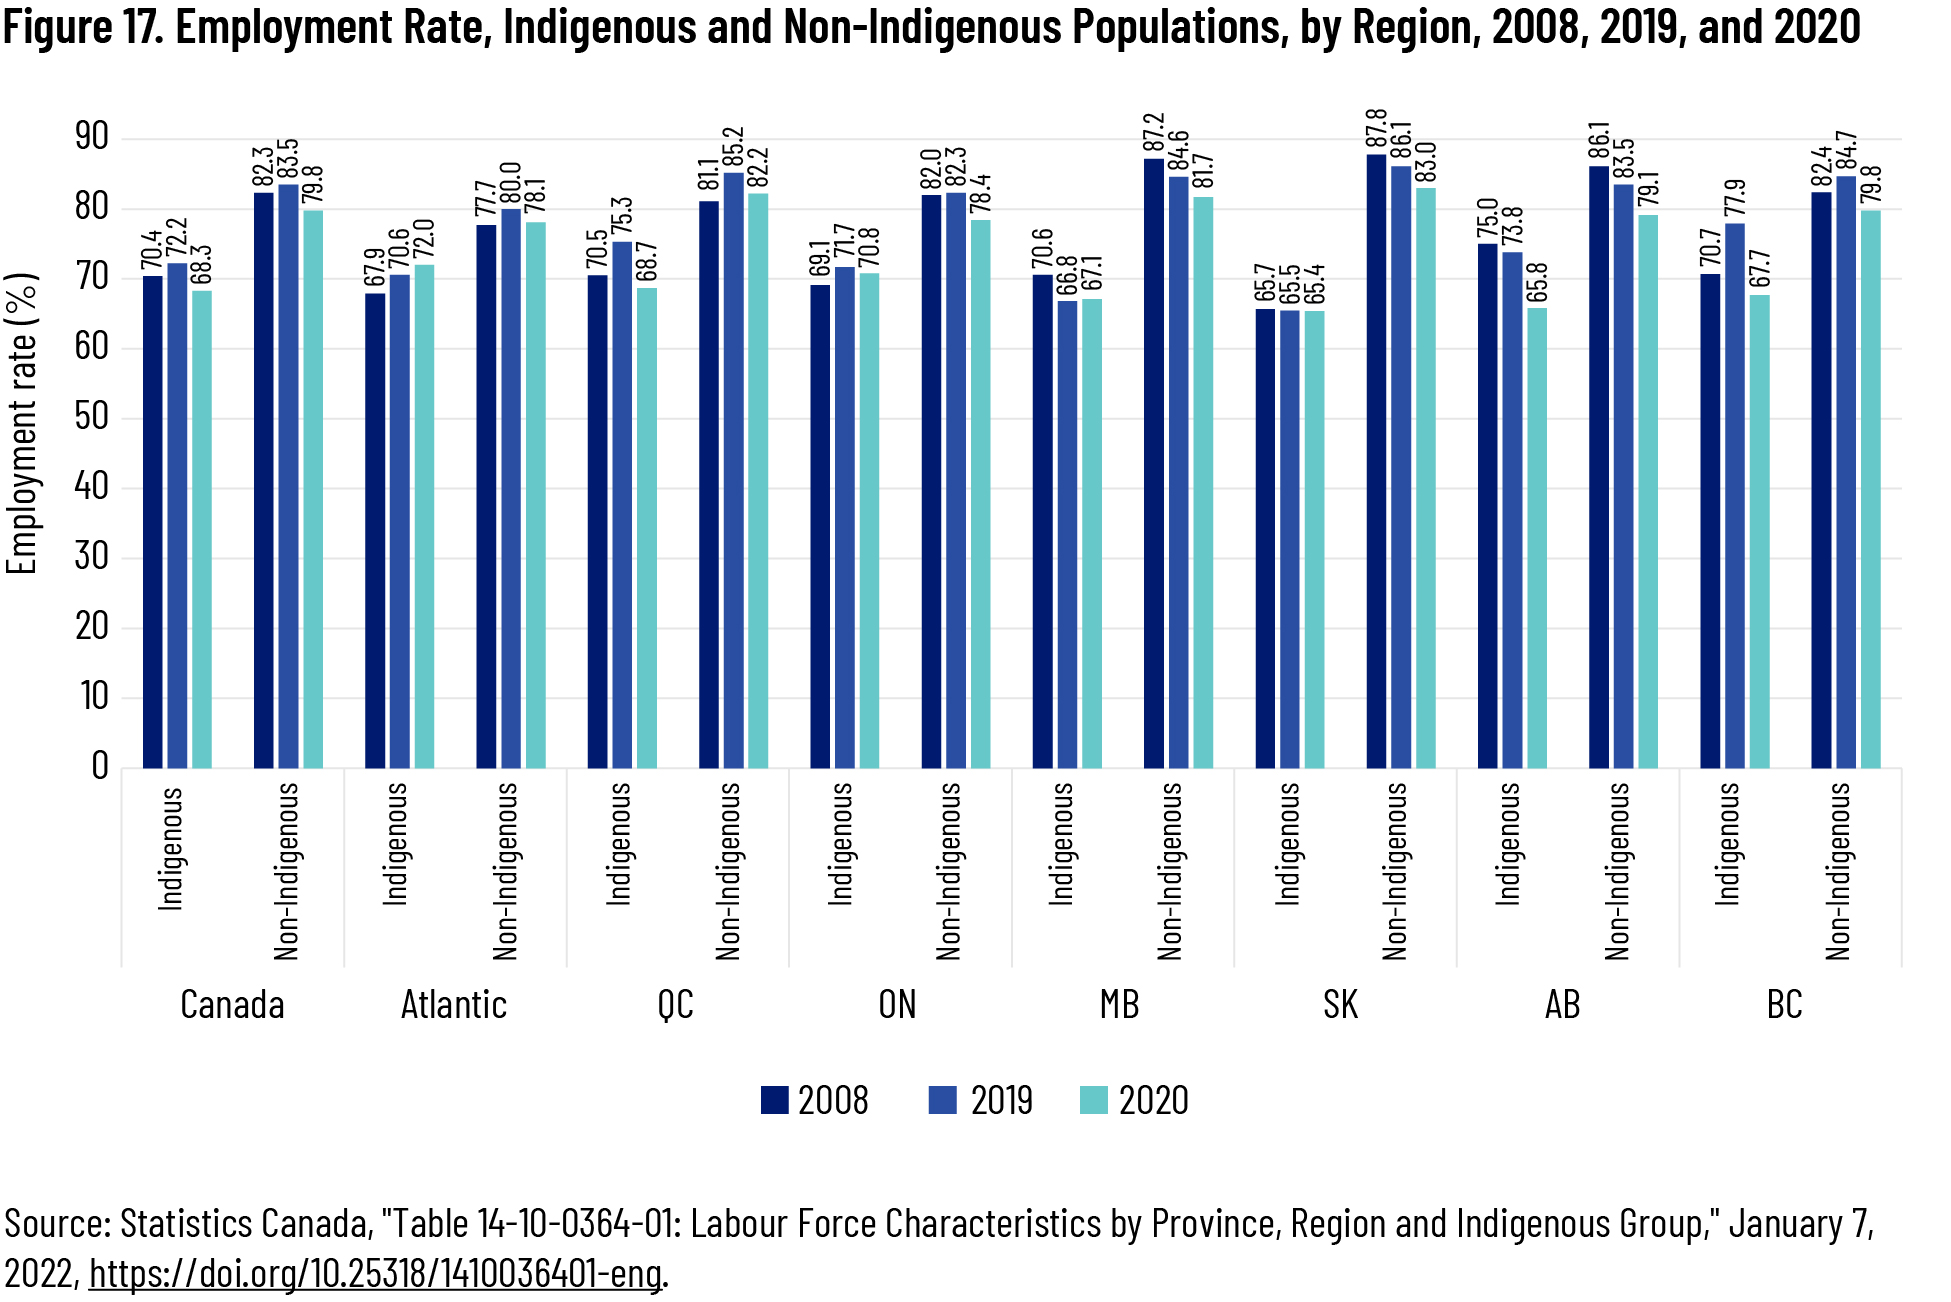 Figure 17. Employment Rate, Indigenous and Non-Indigenous Populations, by Region, 2008, 2019, and 2020